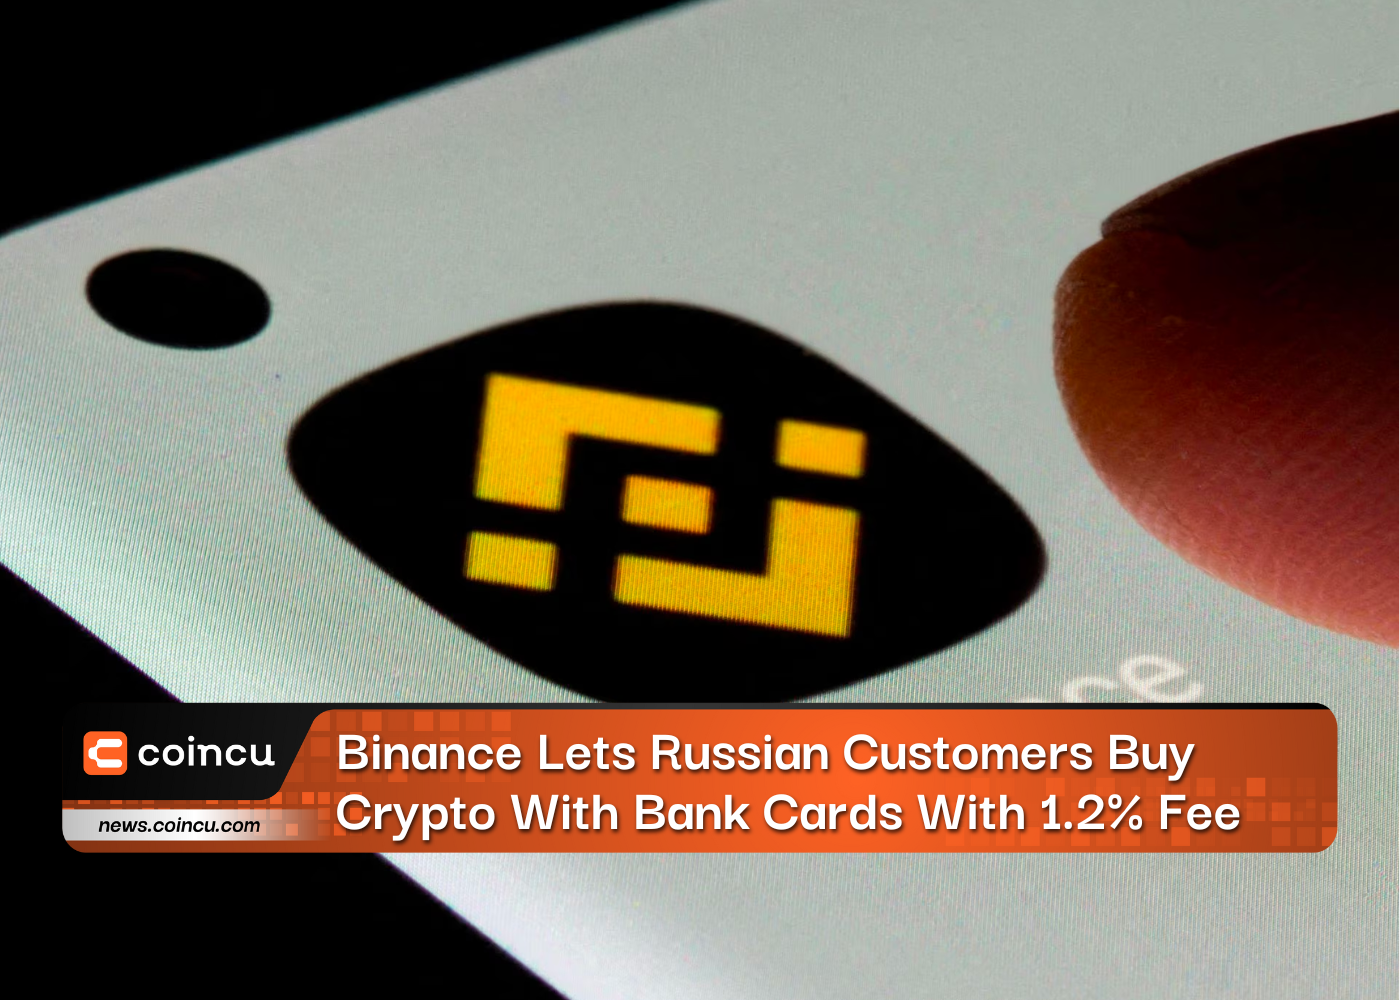 Binance Lets Russian Customers Buy Crypto With Bank Cards With 1.2% Fee